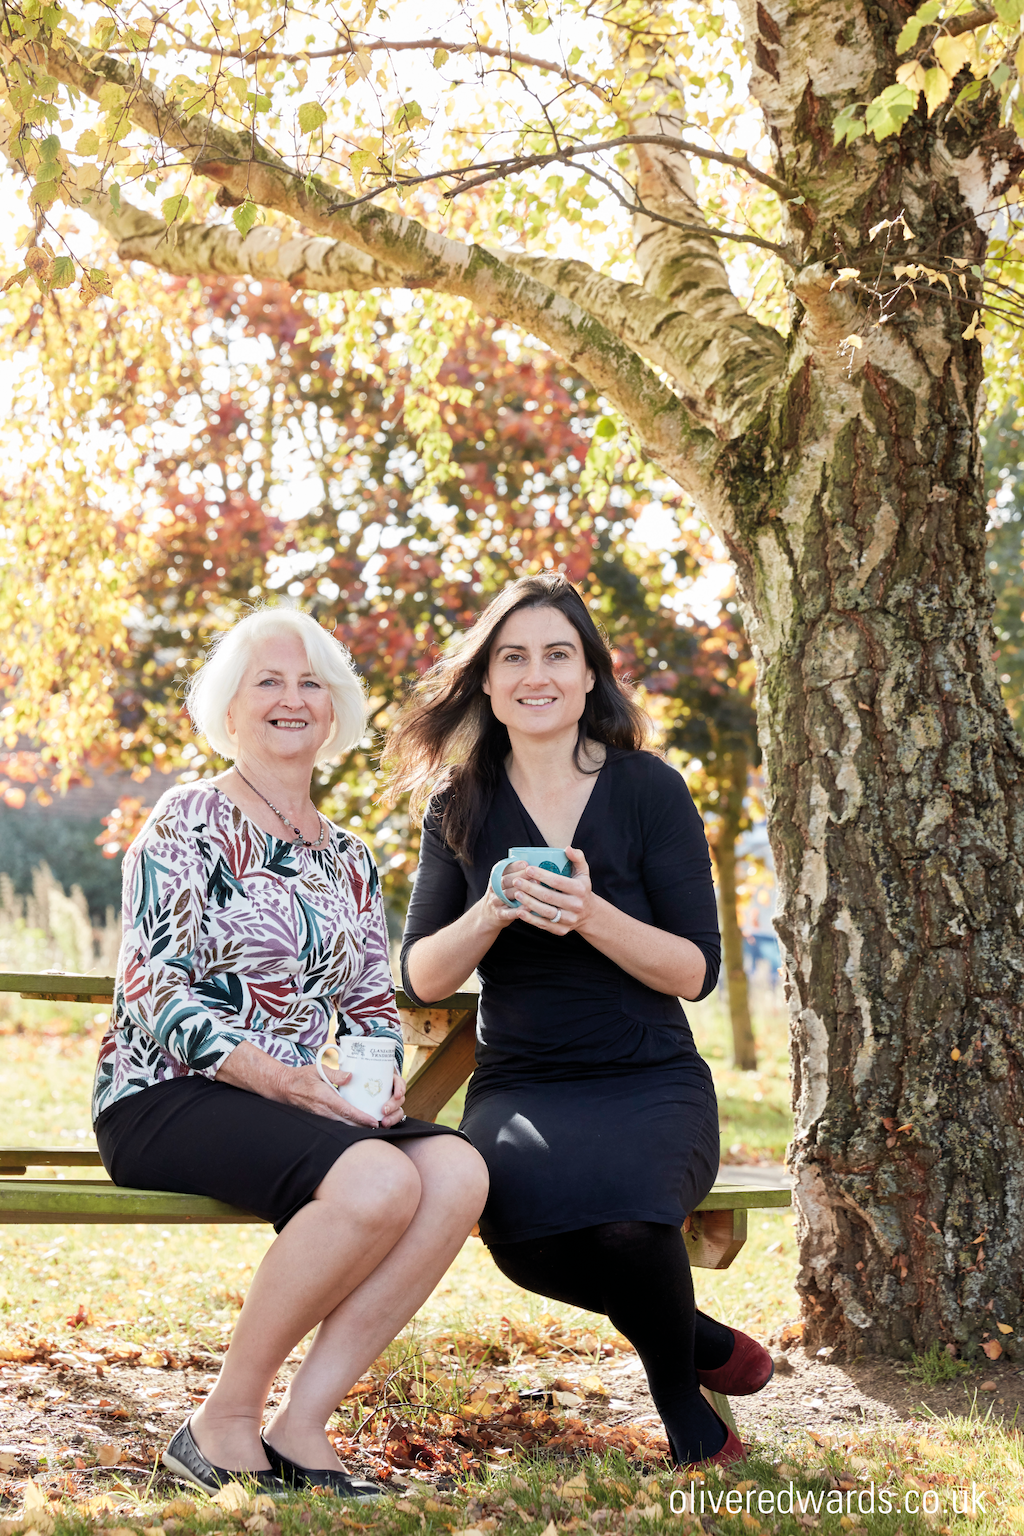 Odylique founder Margaret and her daughter Abbie. They are sitting on a bench under a tree.